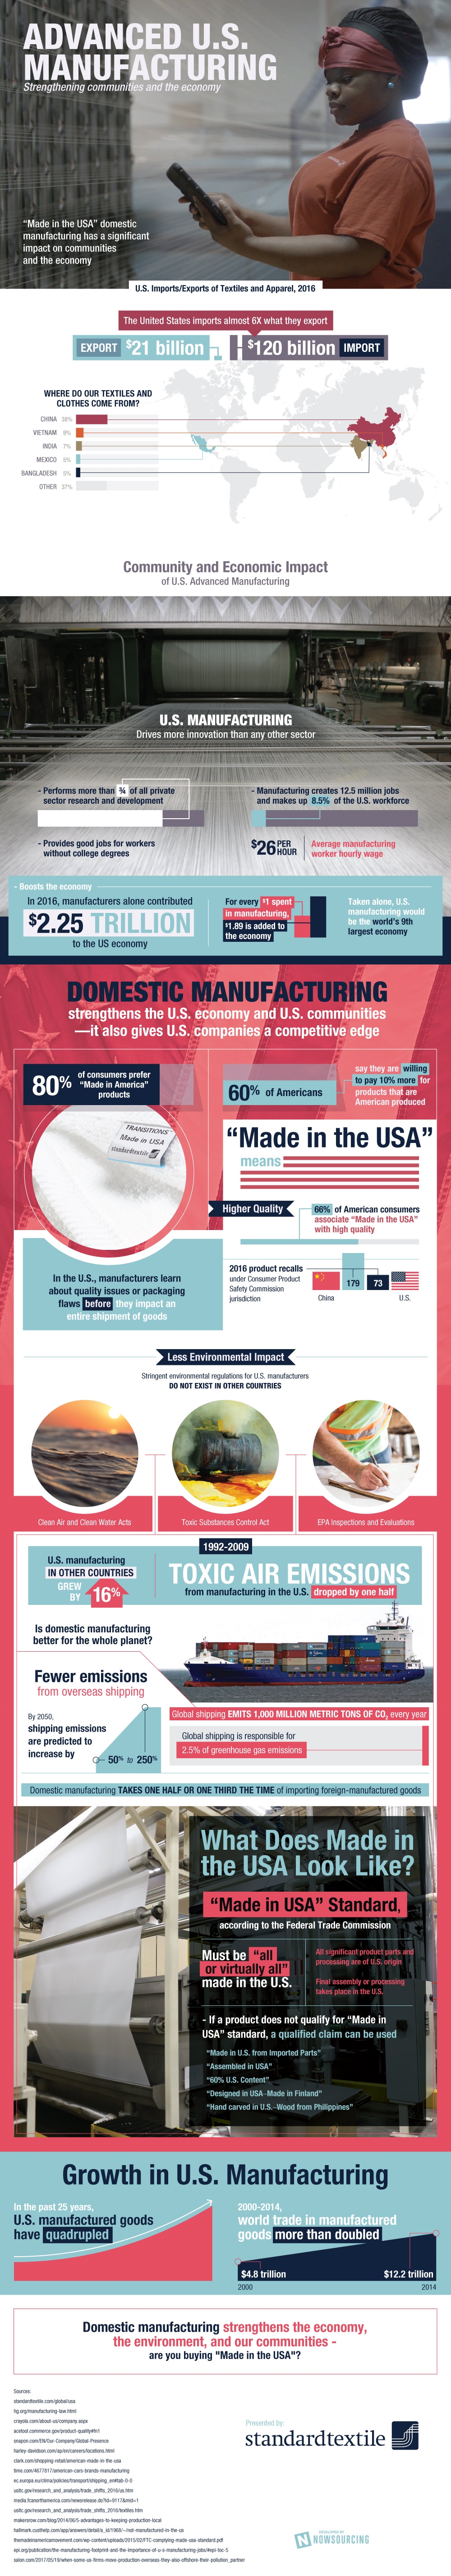 How Advanced Manufacturing Is Driving The U.S. Economy [Infographic]